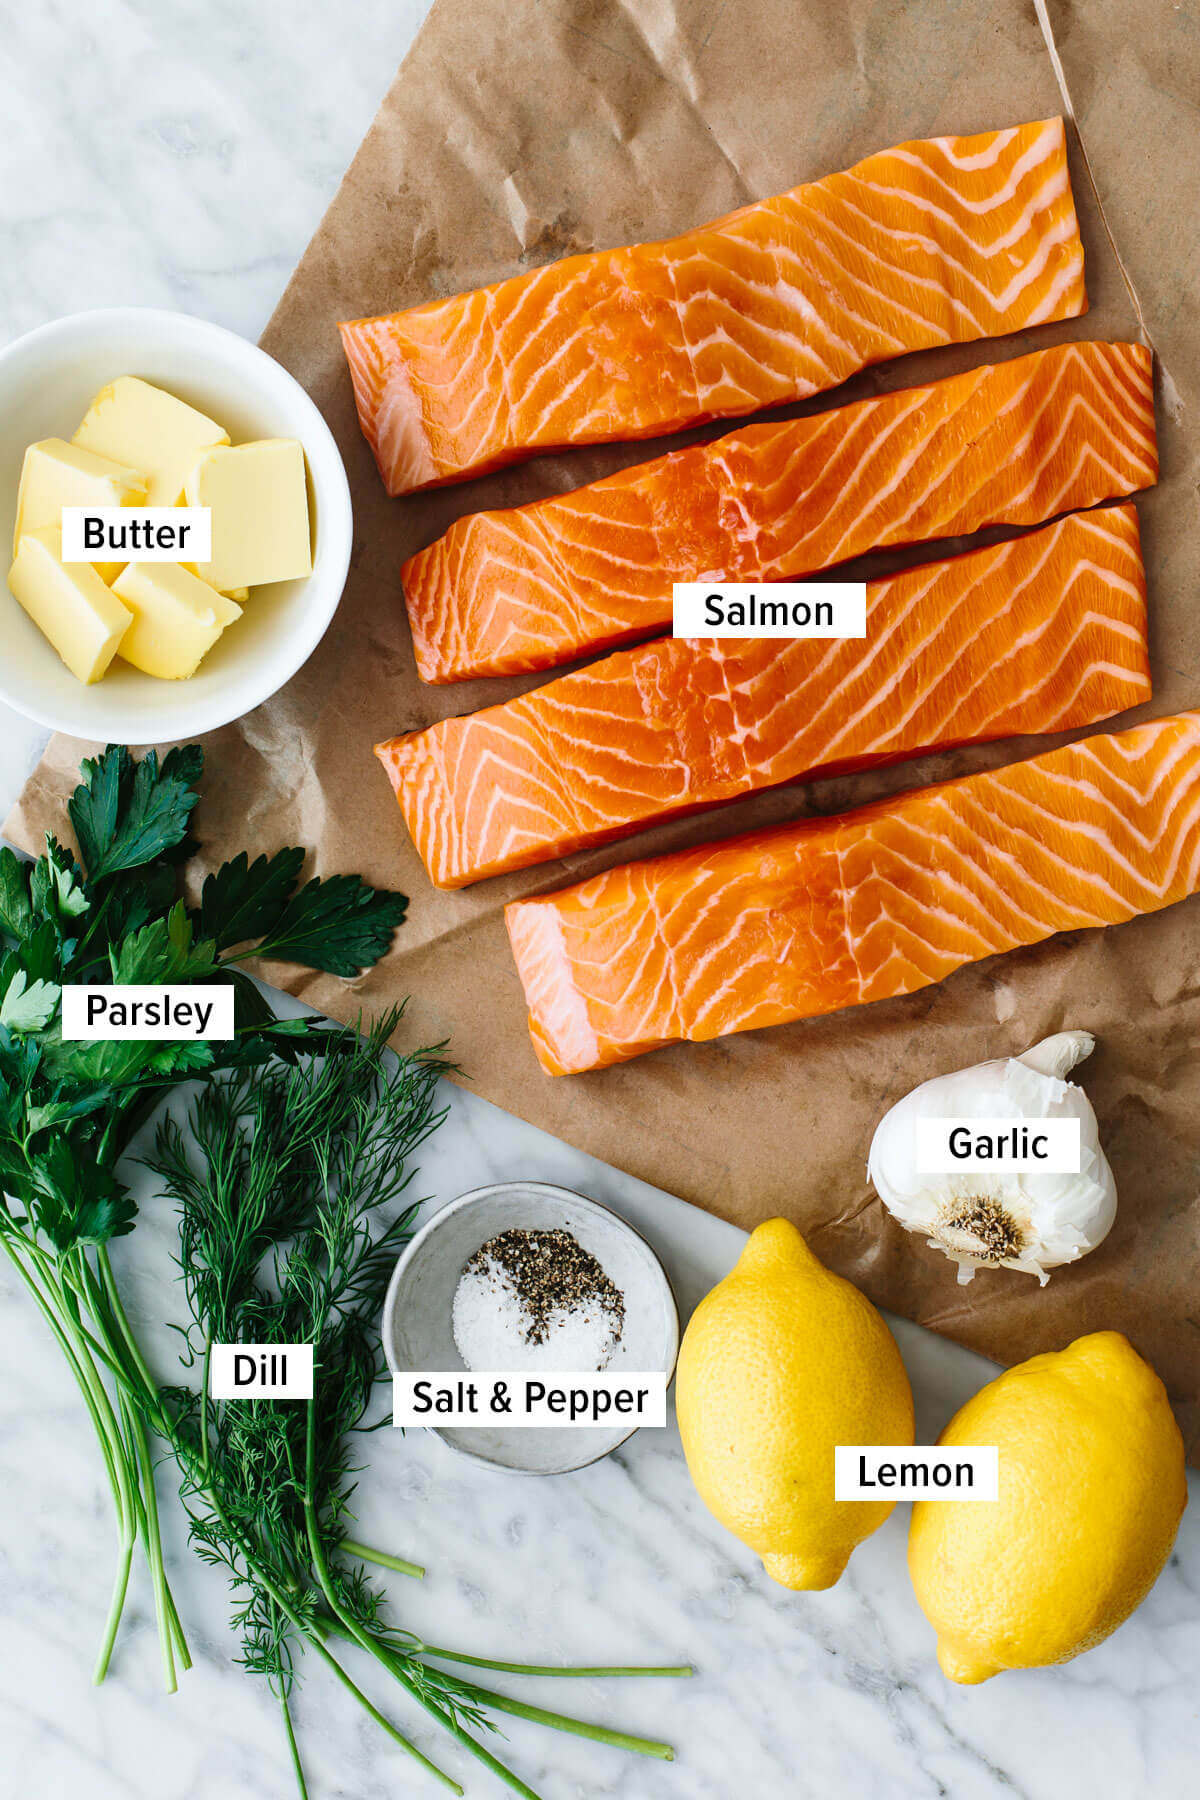 Ingredients for baked salmon on a table.